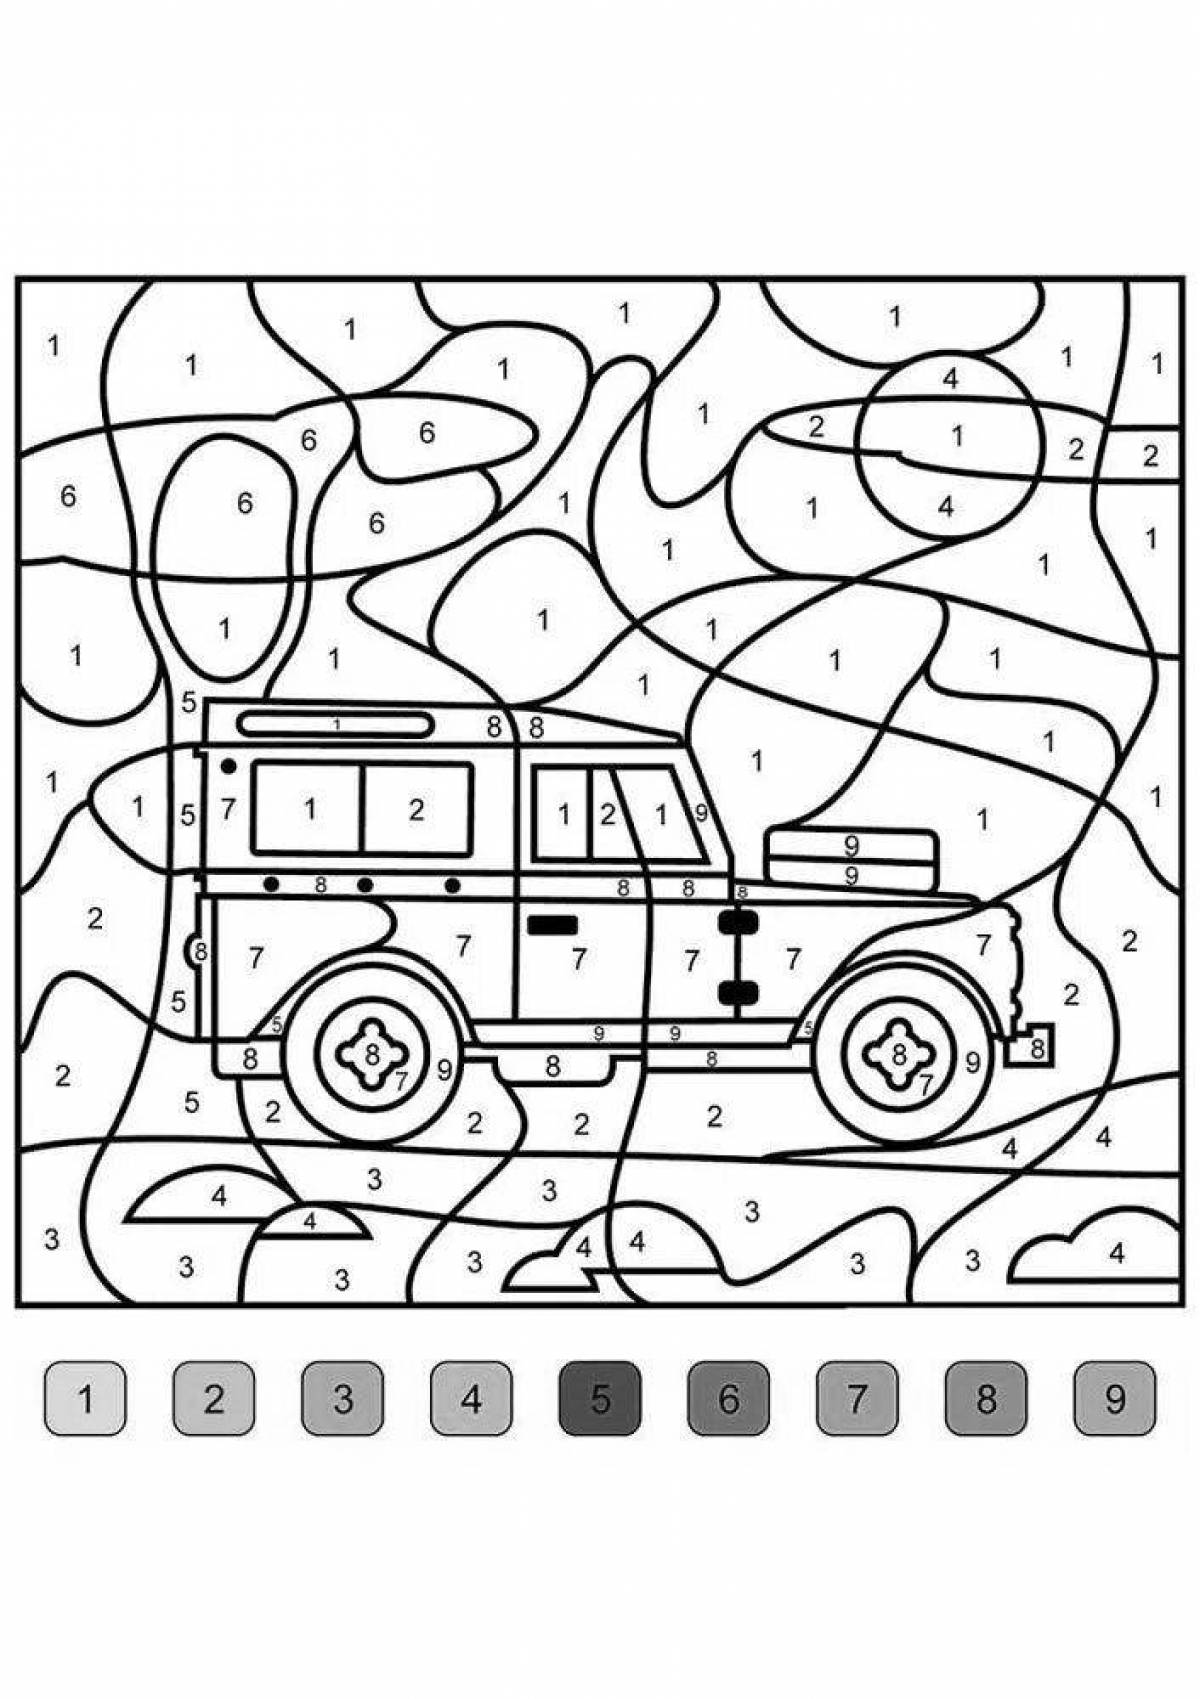 Creative coloring game for android